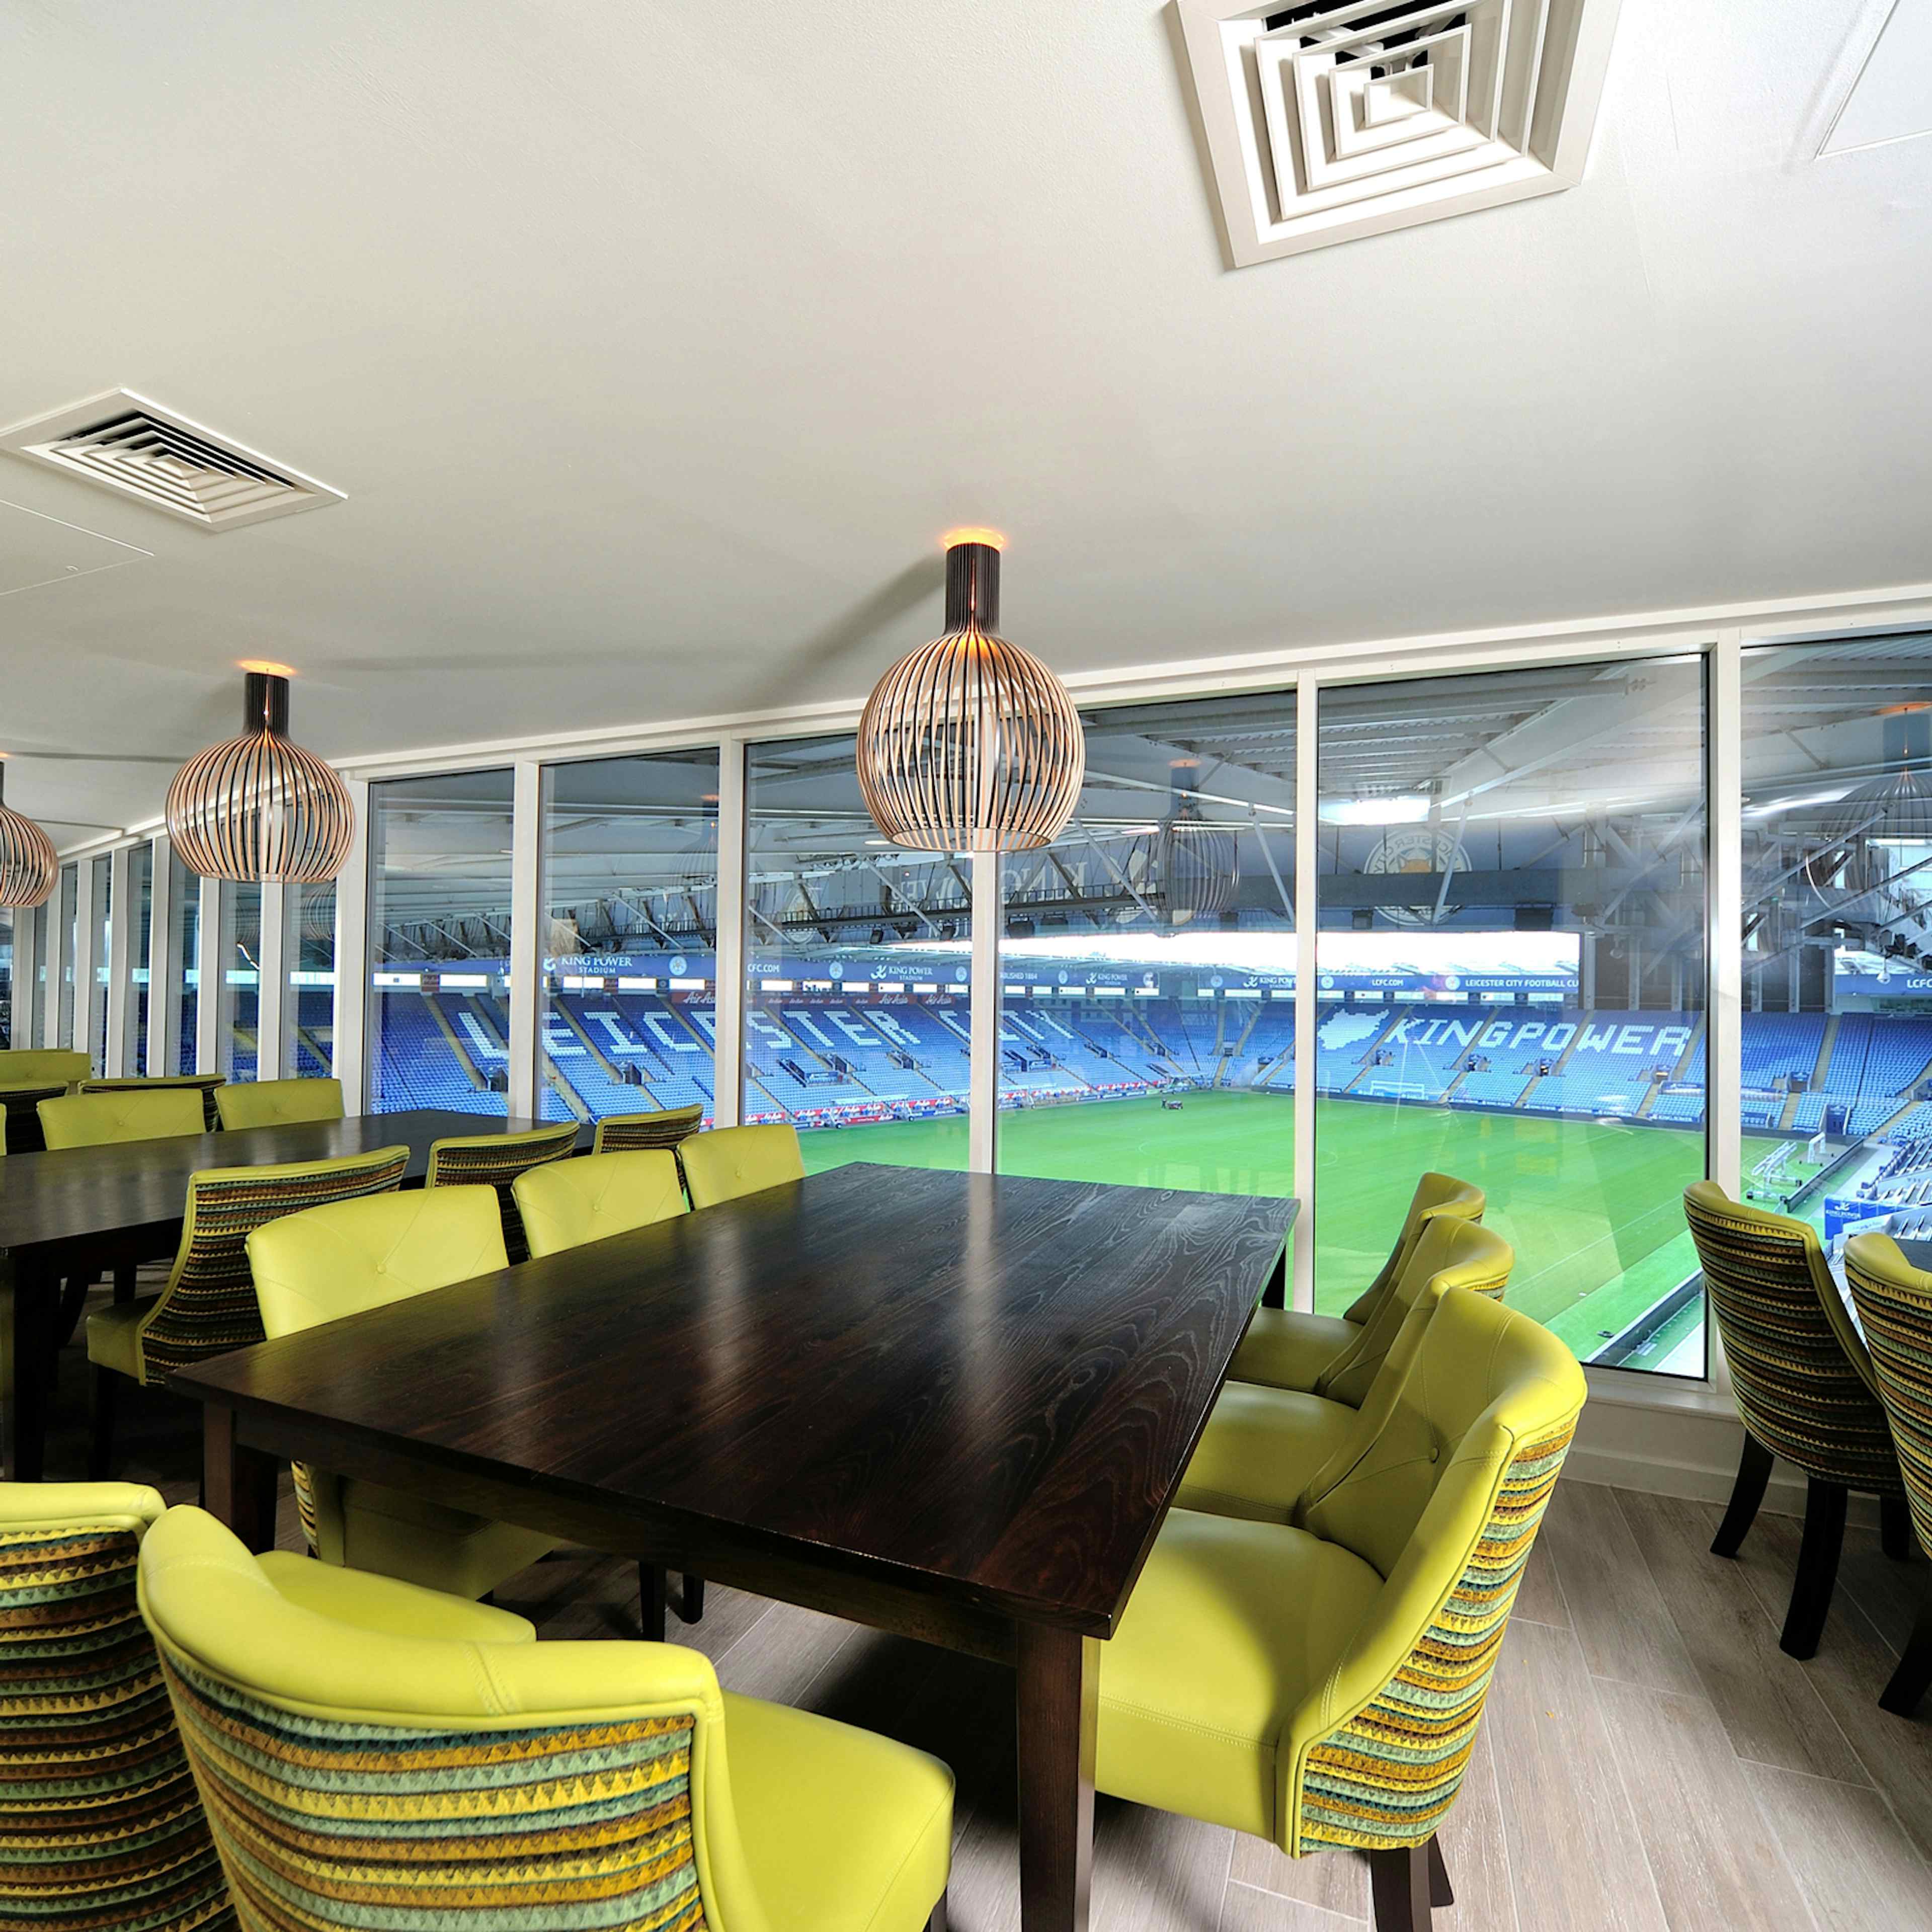 Leicester City Football Club - The Gallery image 1